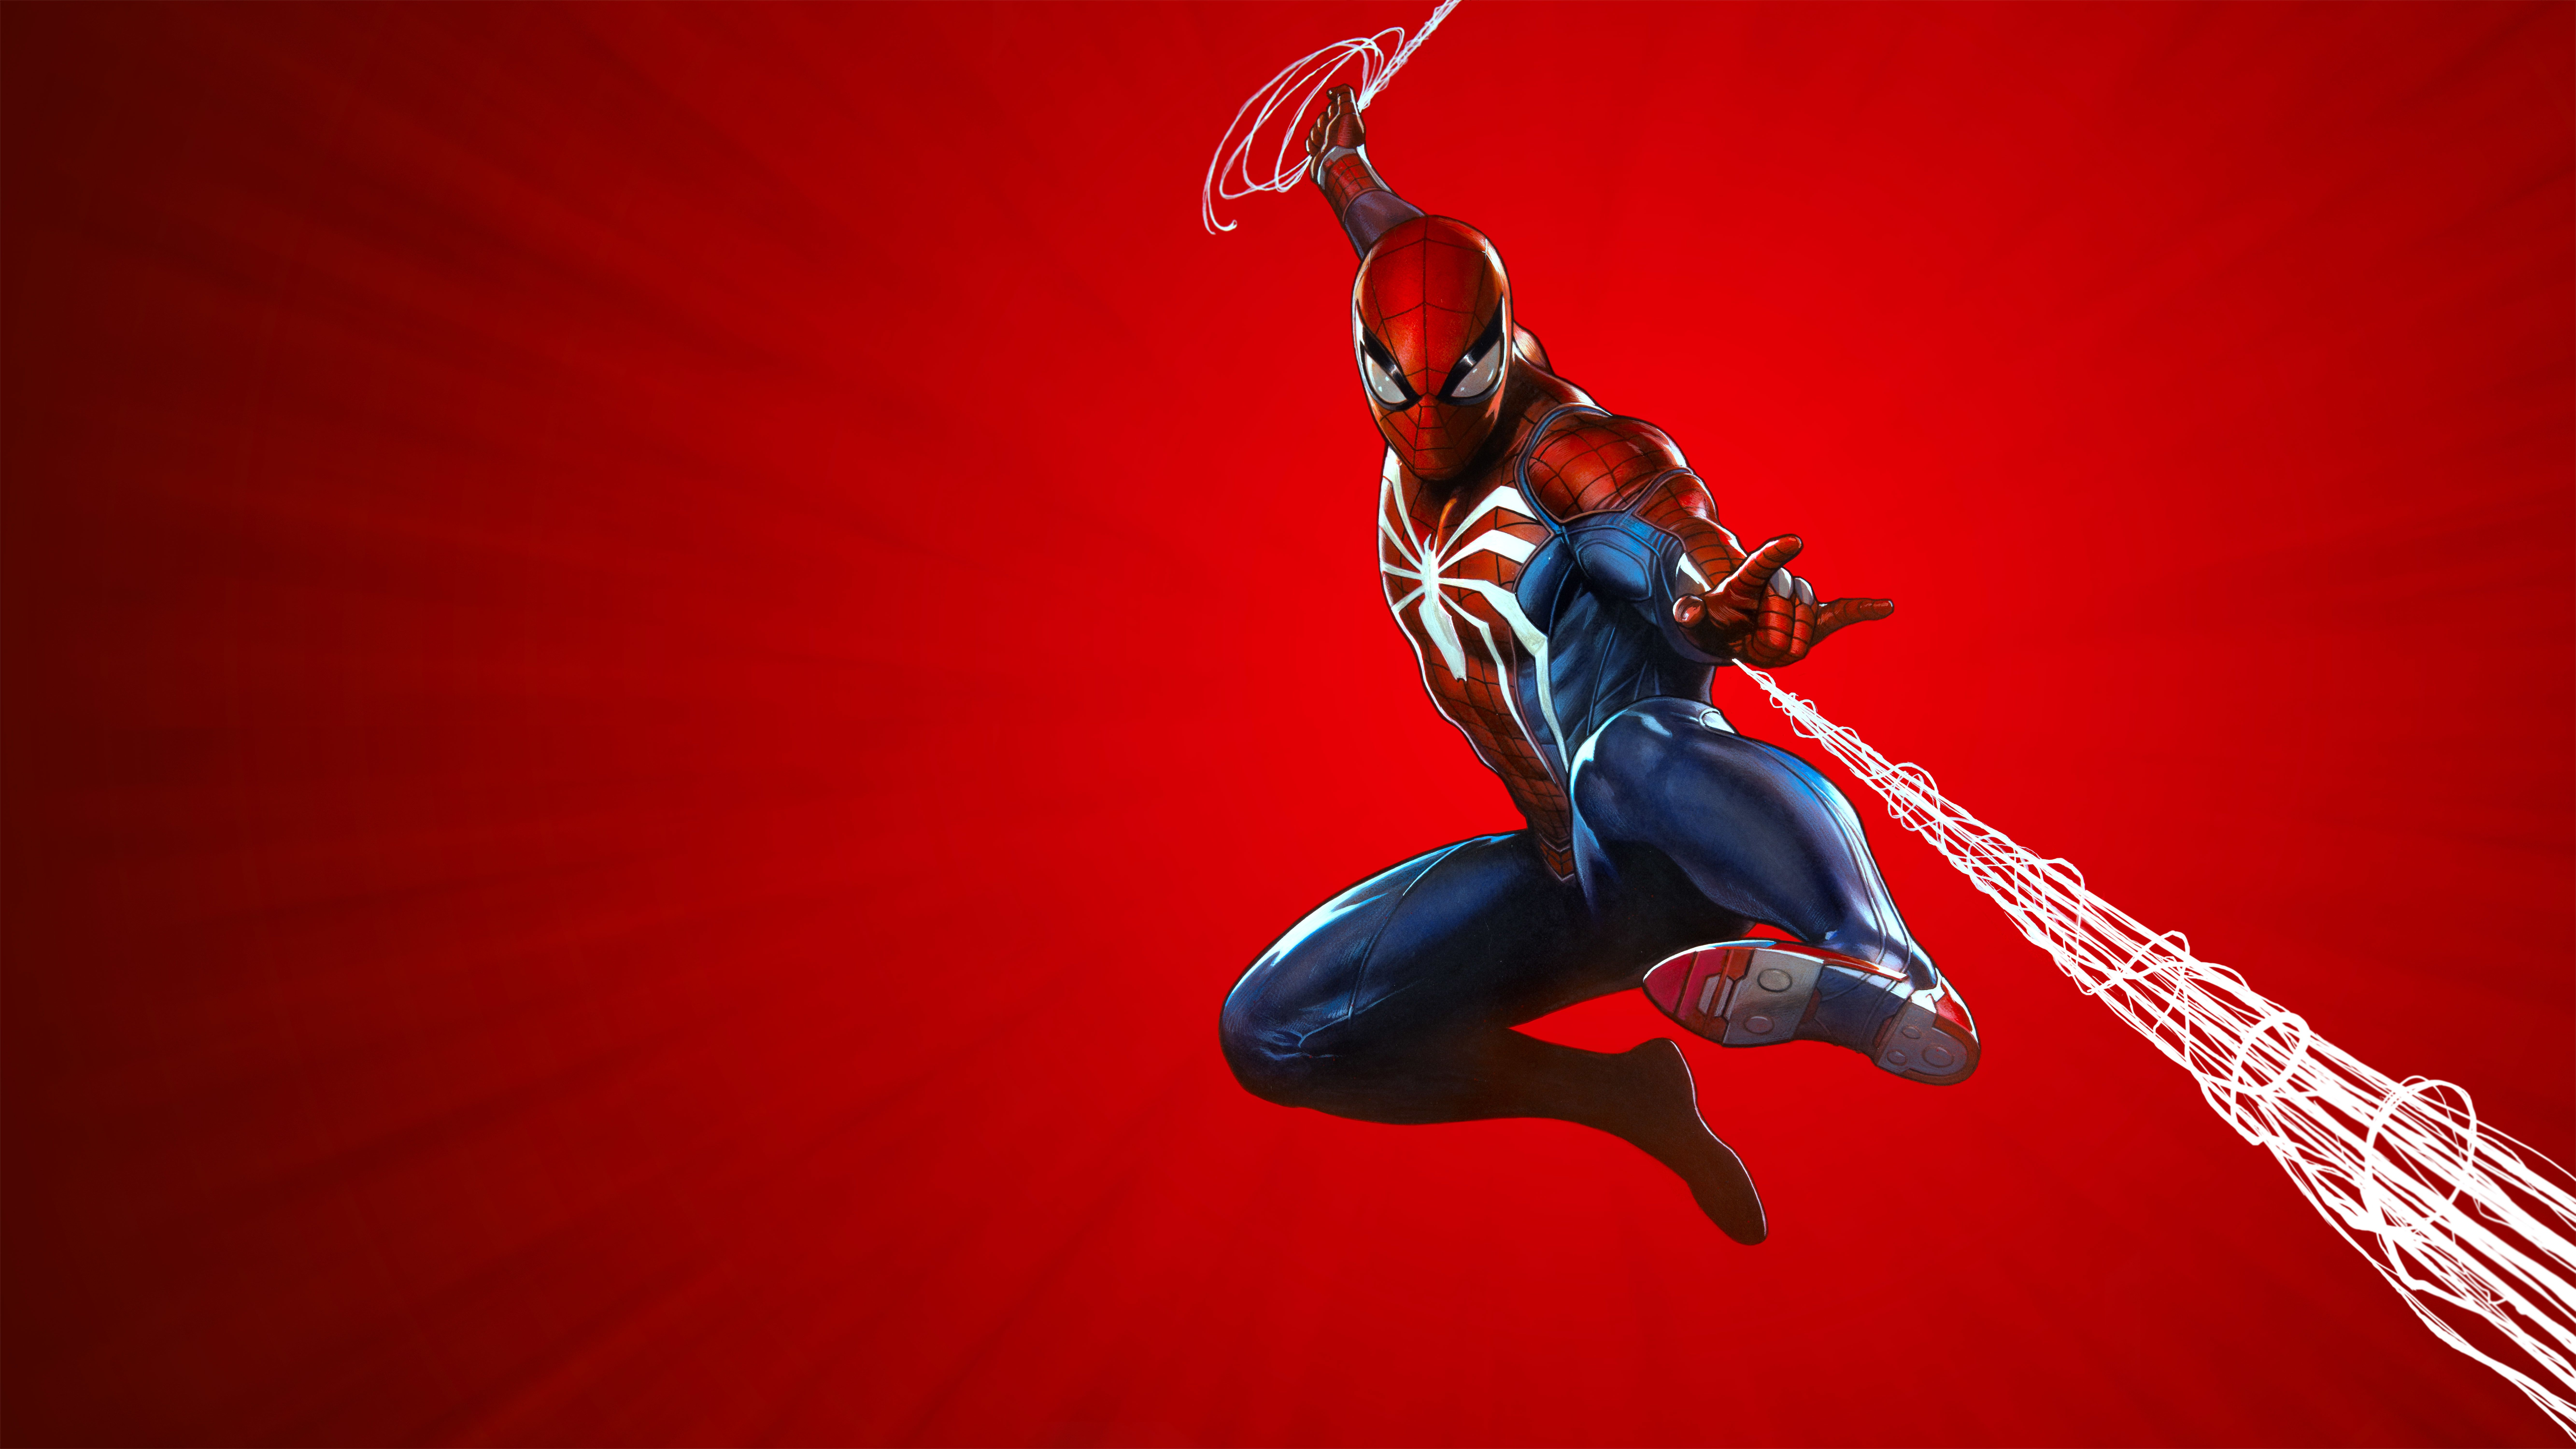 Spider Man PS4 Wallpaper, HD Games 4K Wallpaper, Image, Photo And Background